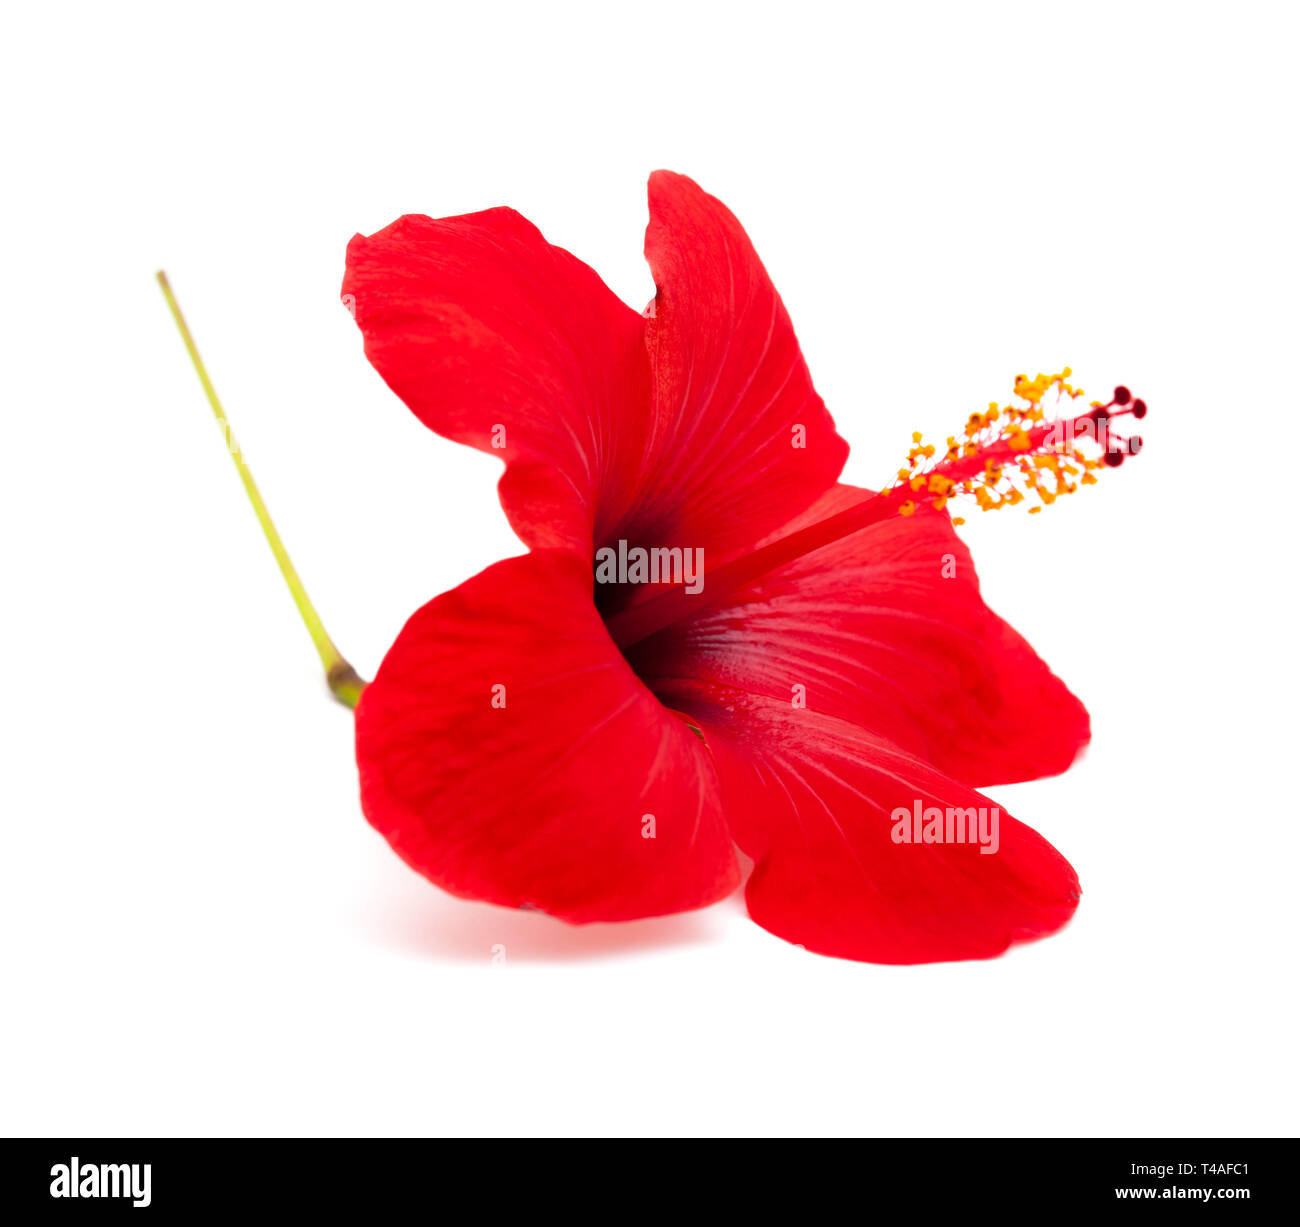 single red hibiscus flower isolated on white background Stock Photo